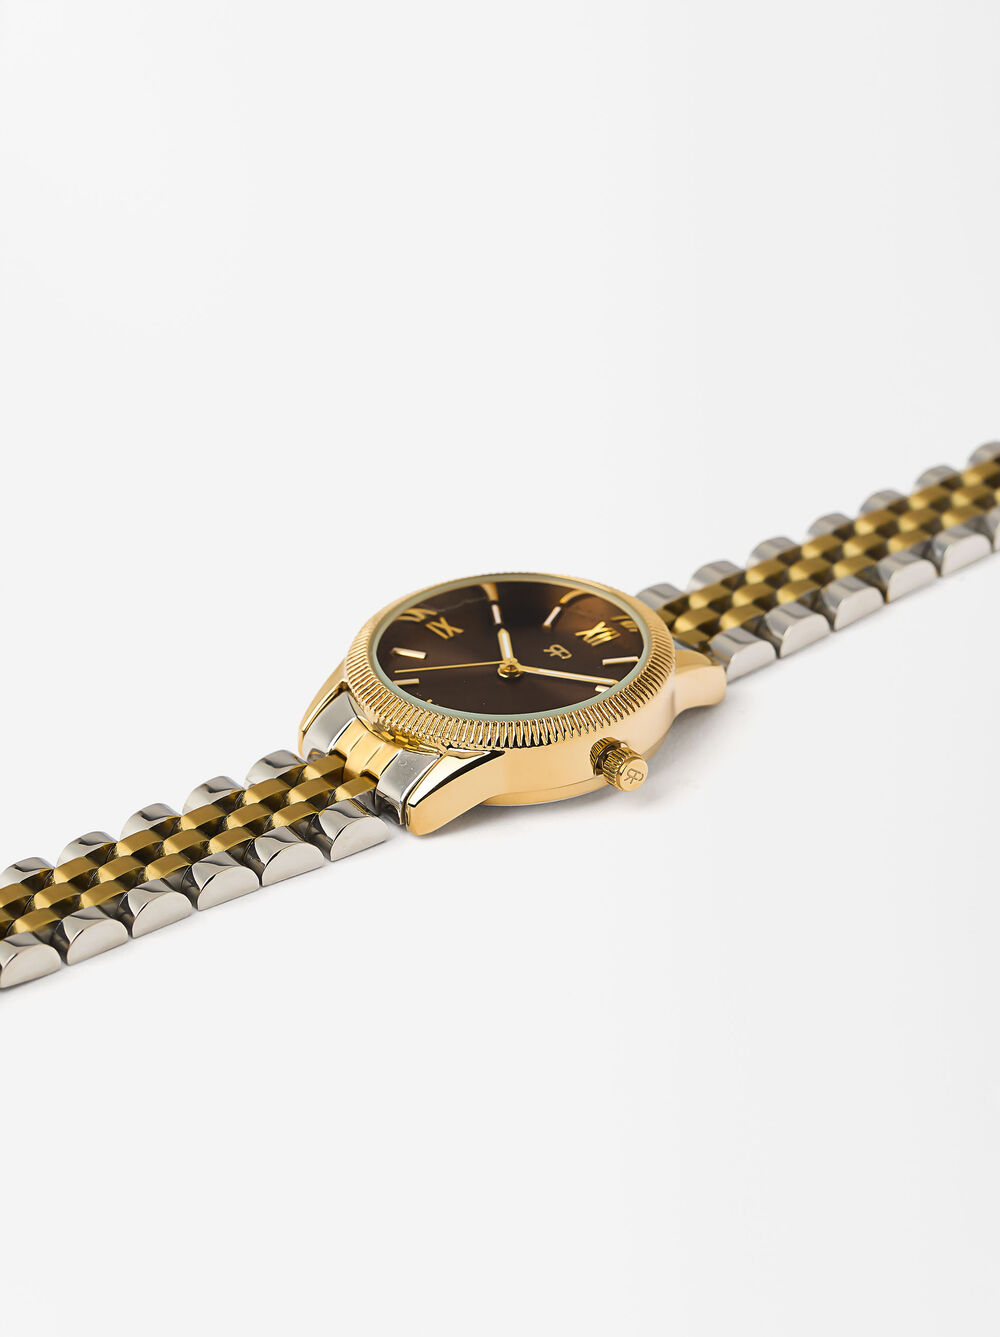 Personalized Watch With A Steel Bracelet